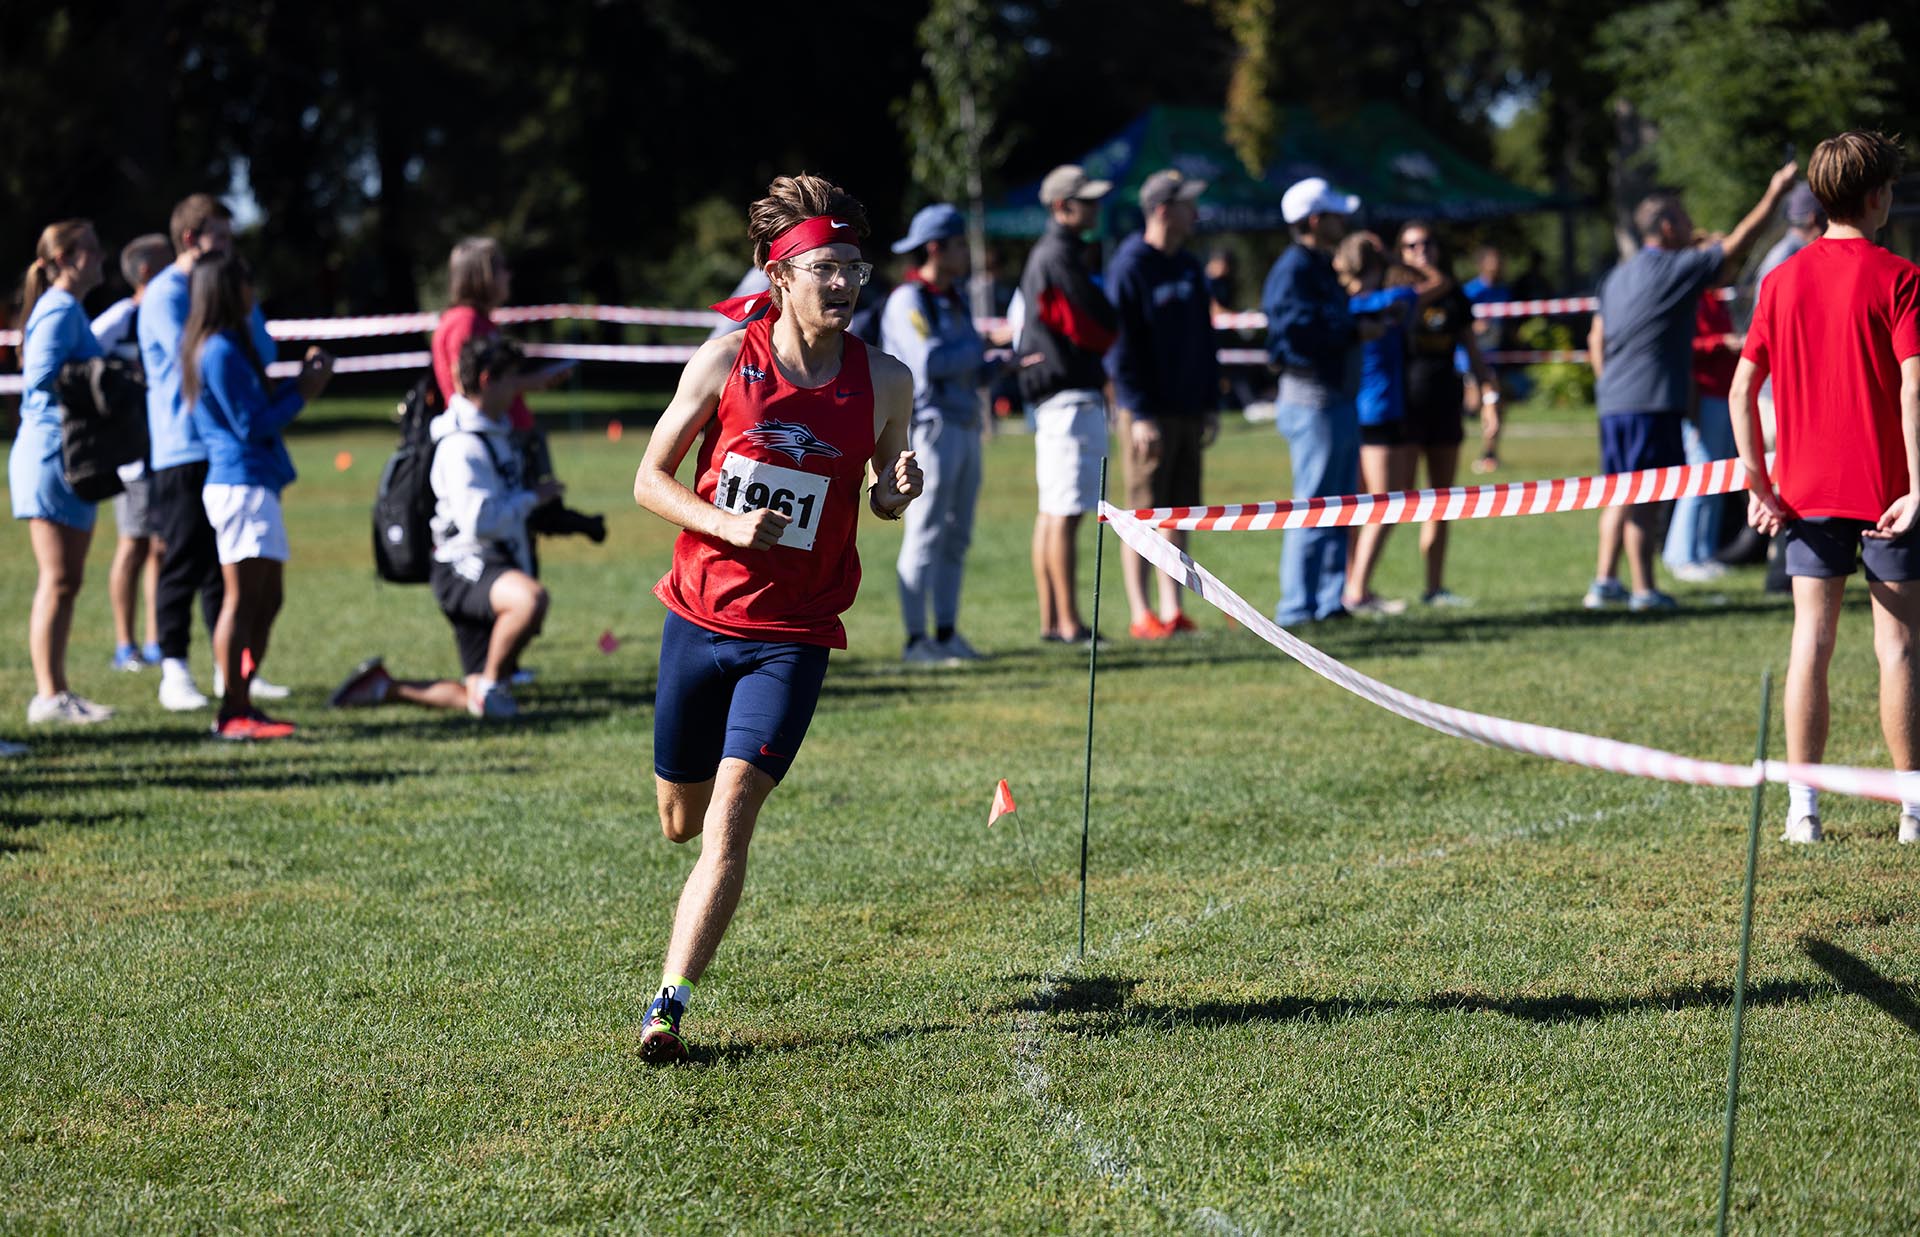 Jonathan Duran competes in the men’s cross country race